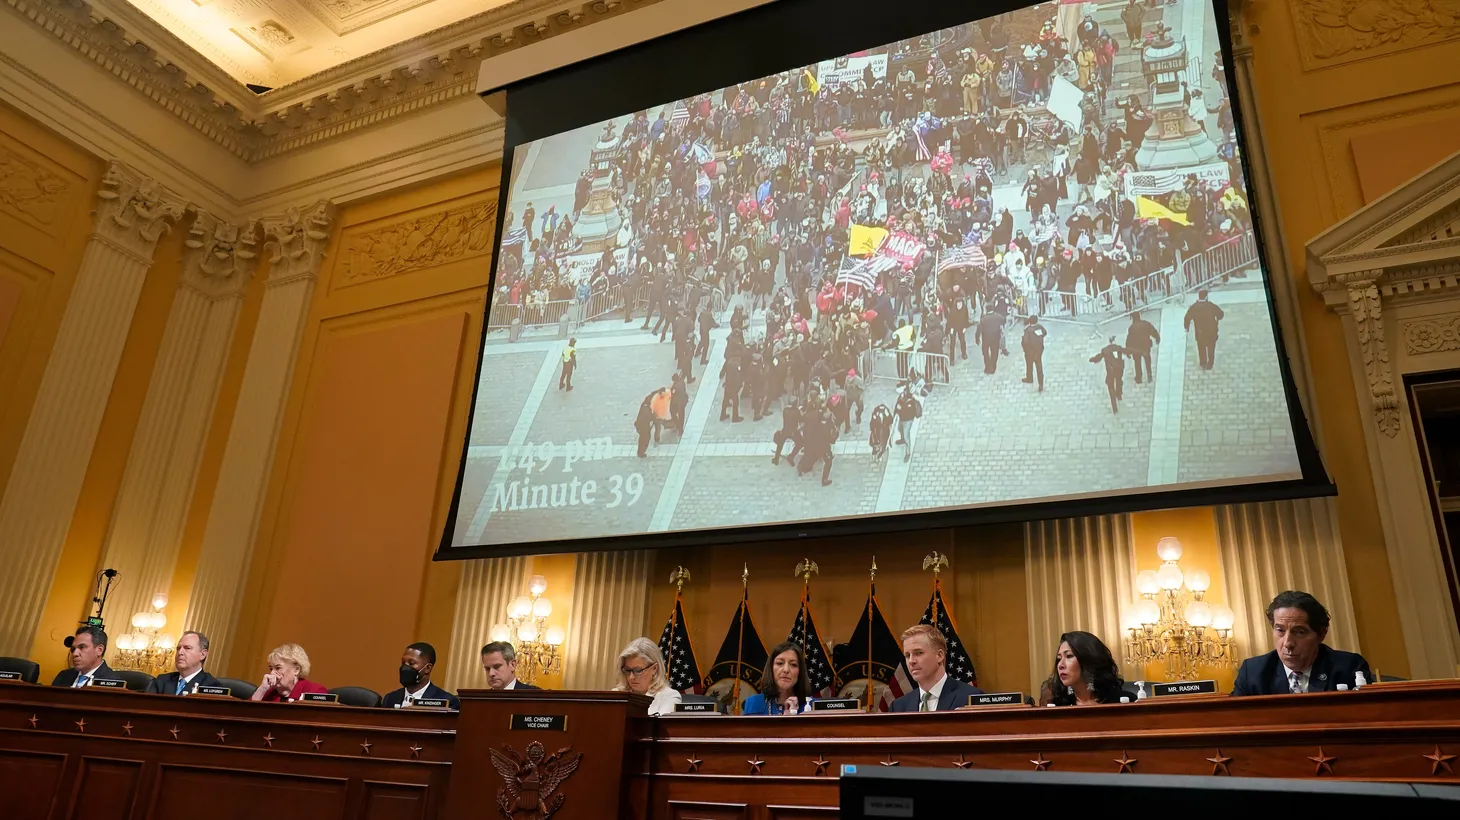 July 21, 2022: A video clip of rioters heading to the Capitol is played during a public hearing before the House Select Committee to investigate the January 6 attack.